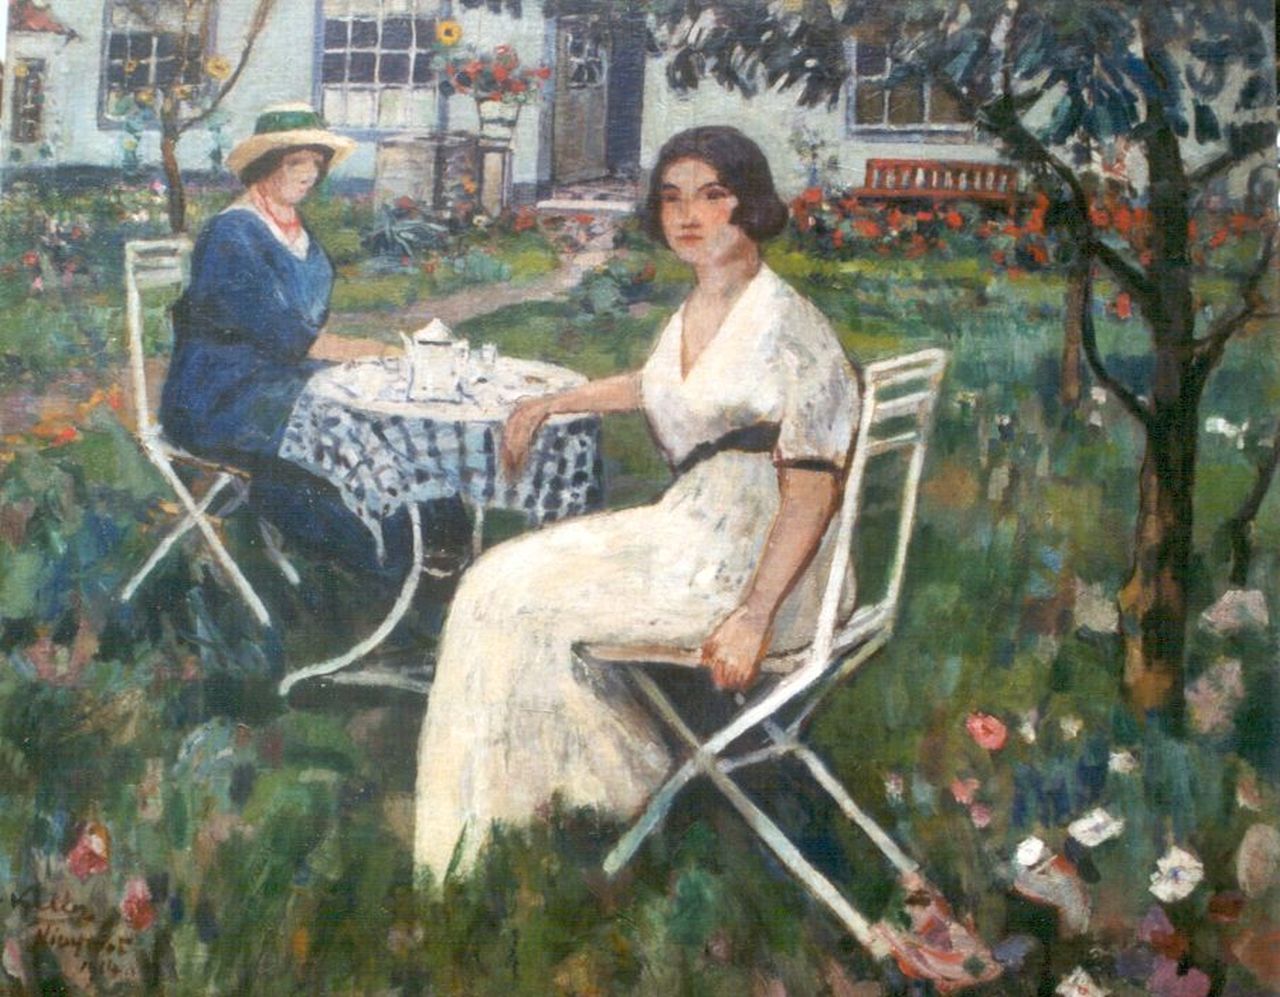 Keller A.  | Adolphe Keller, Tea-time, Nieuwpoort, oil on canvas 85.9 x 106.0 cm, signed l.l. and dated 'Nieuwpoort' 1914